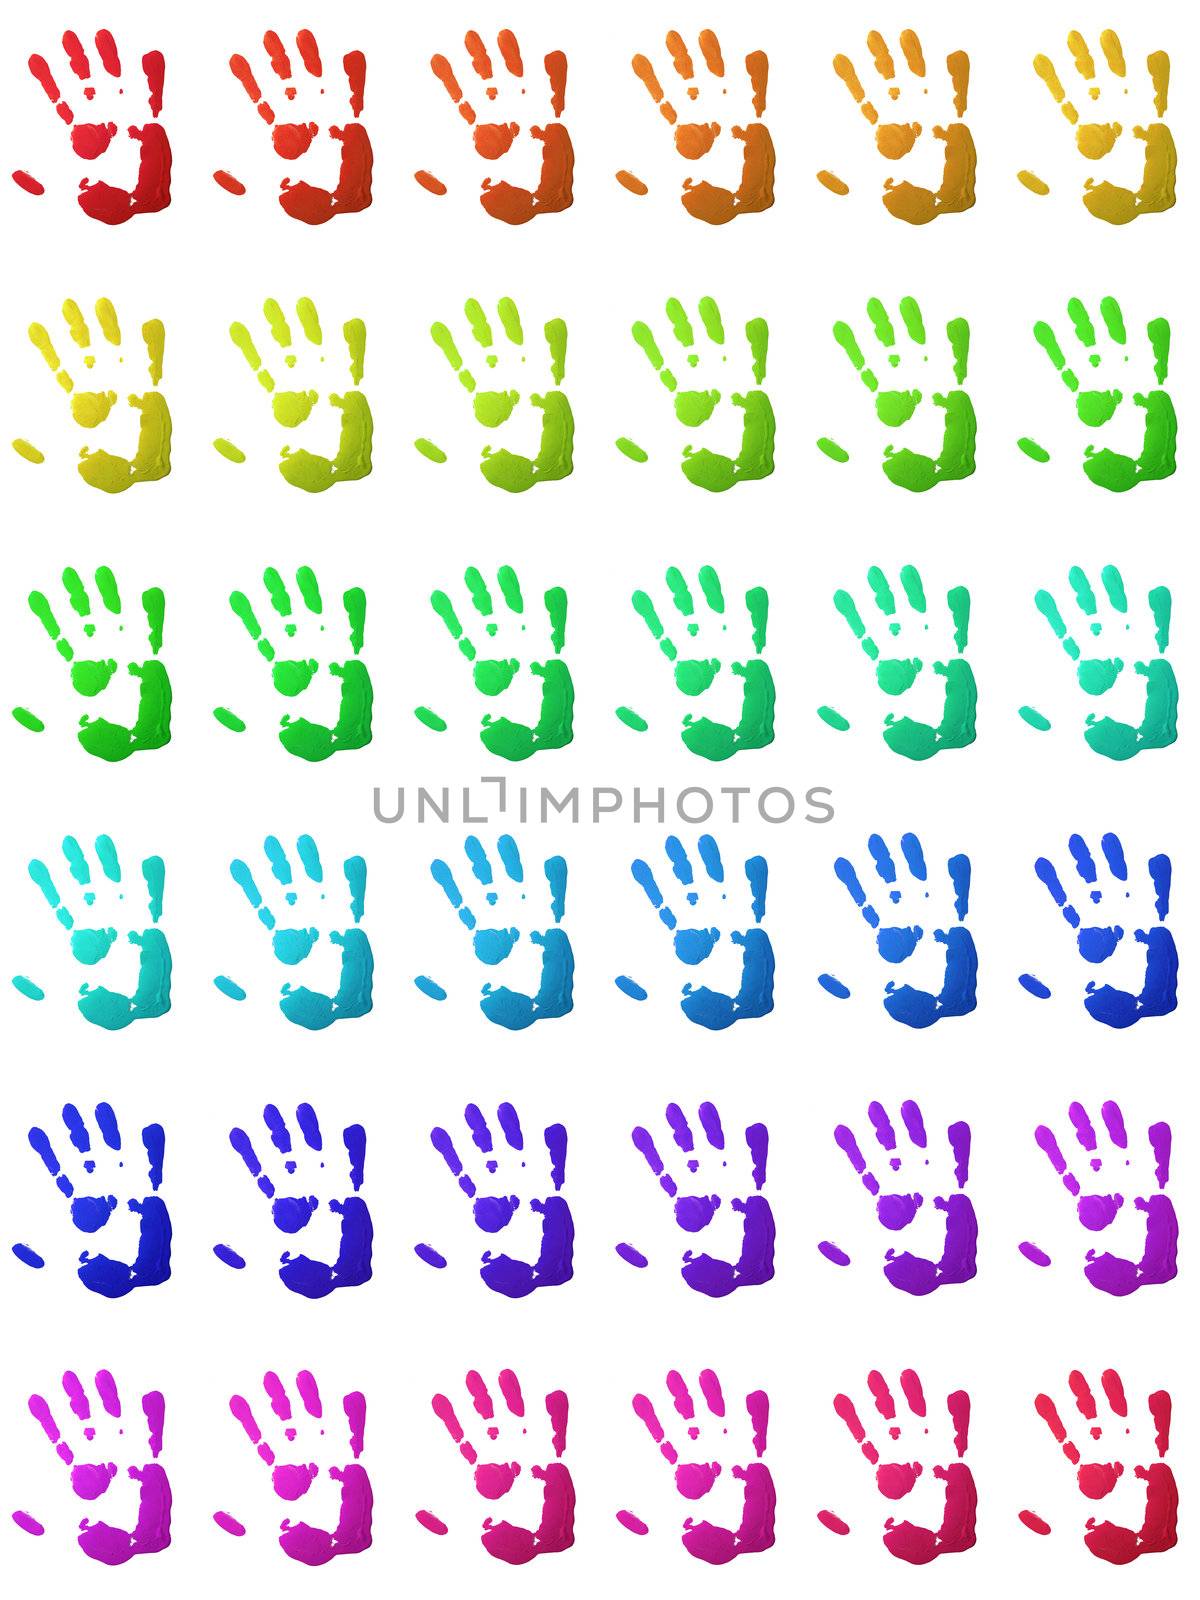 Colorful handprints of human hands on white.